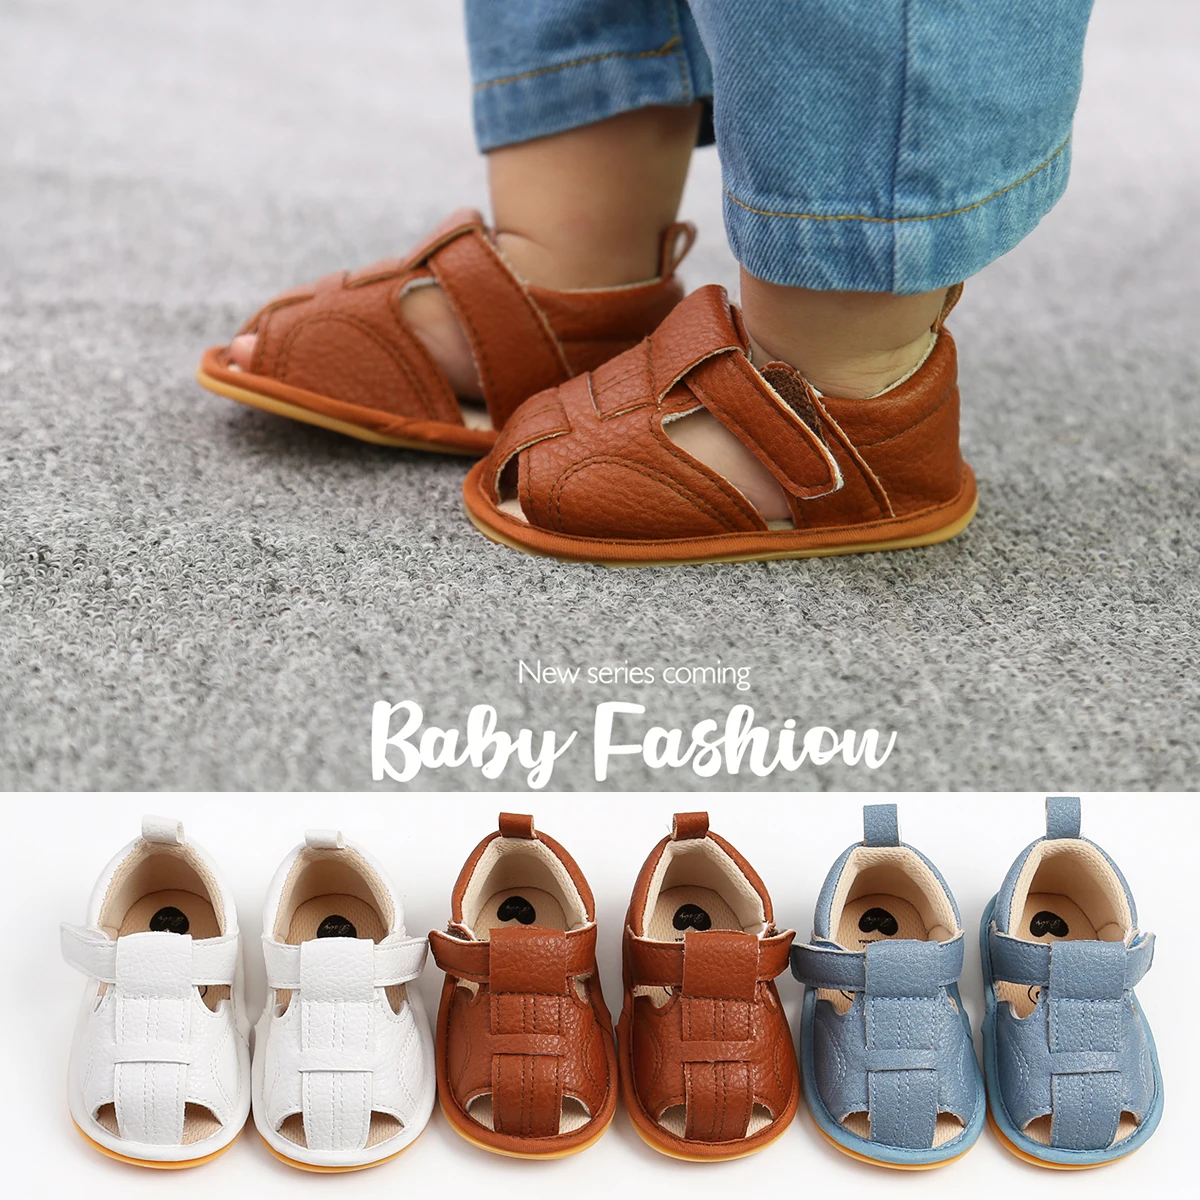 Summer Boys Sandals Soft Leather Closed-Toe Toddler Baby Shoes Boys Girls Beach Shoes Sport Infant Kids Sandals